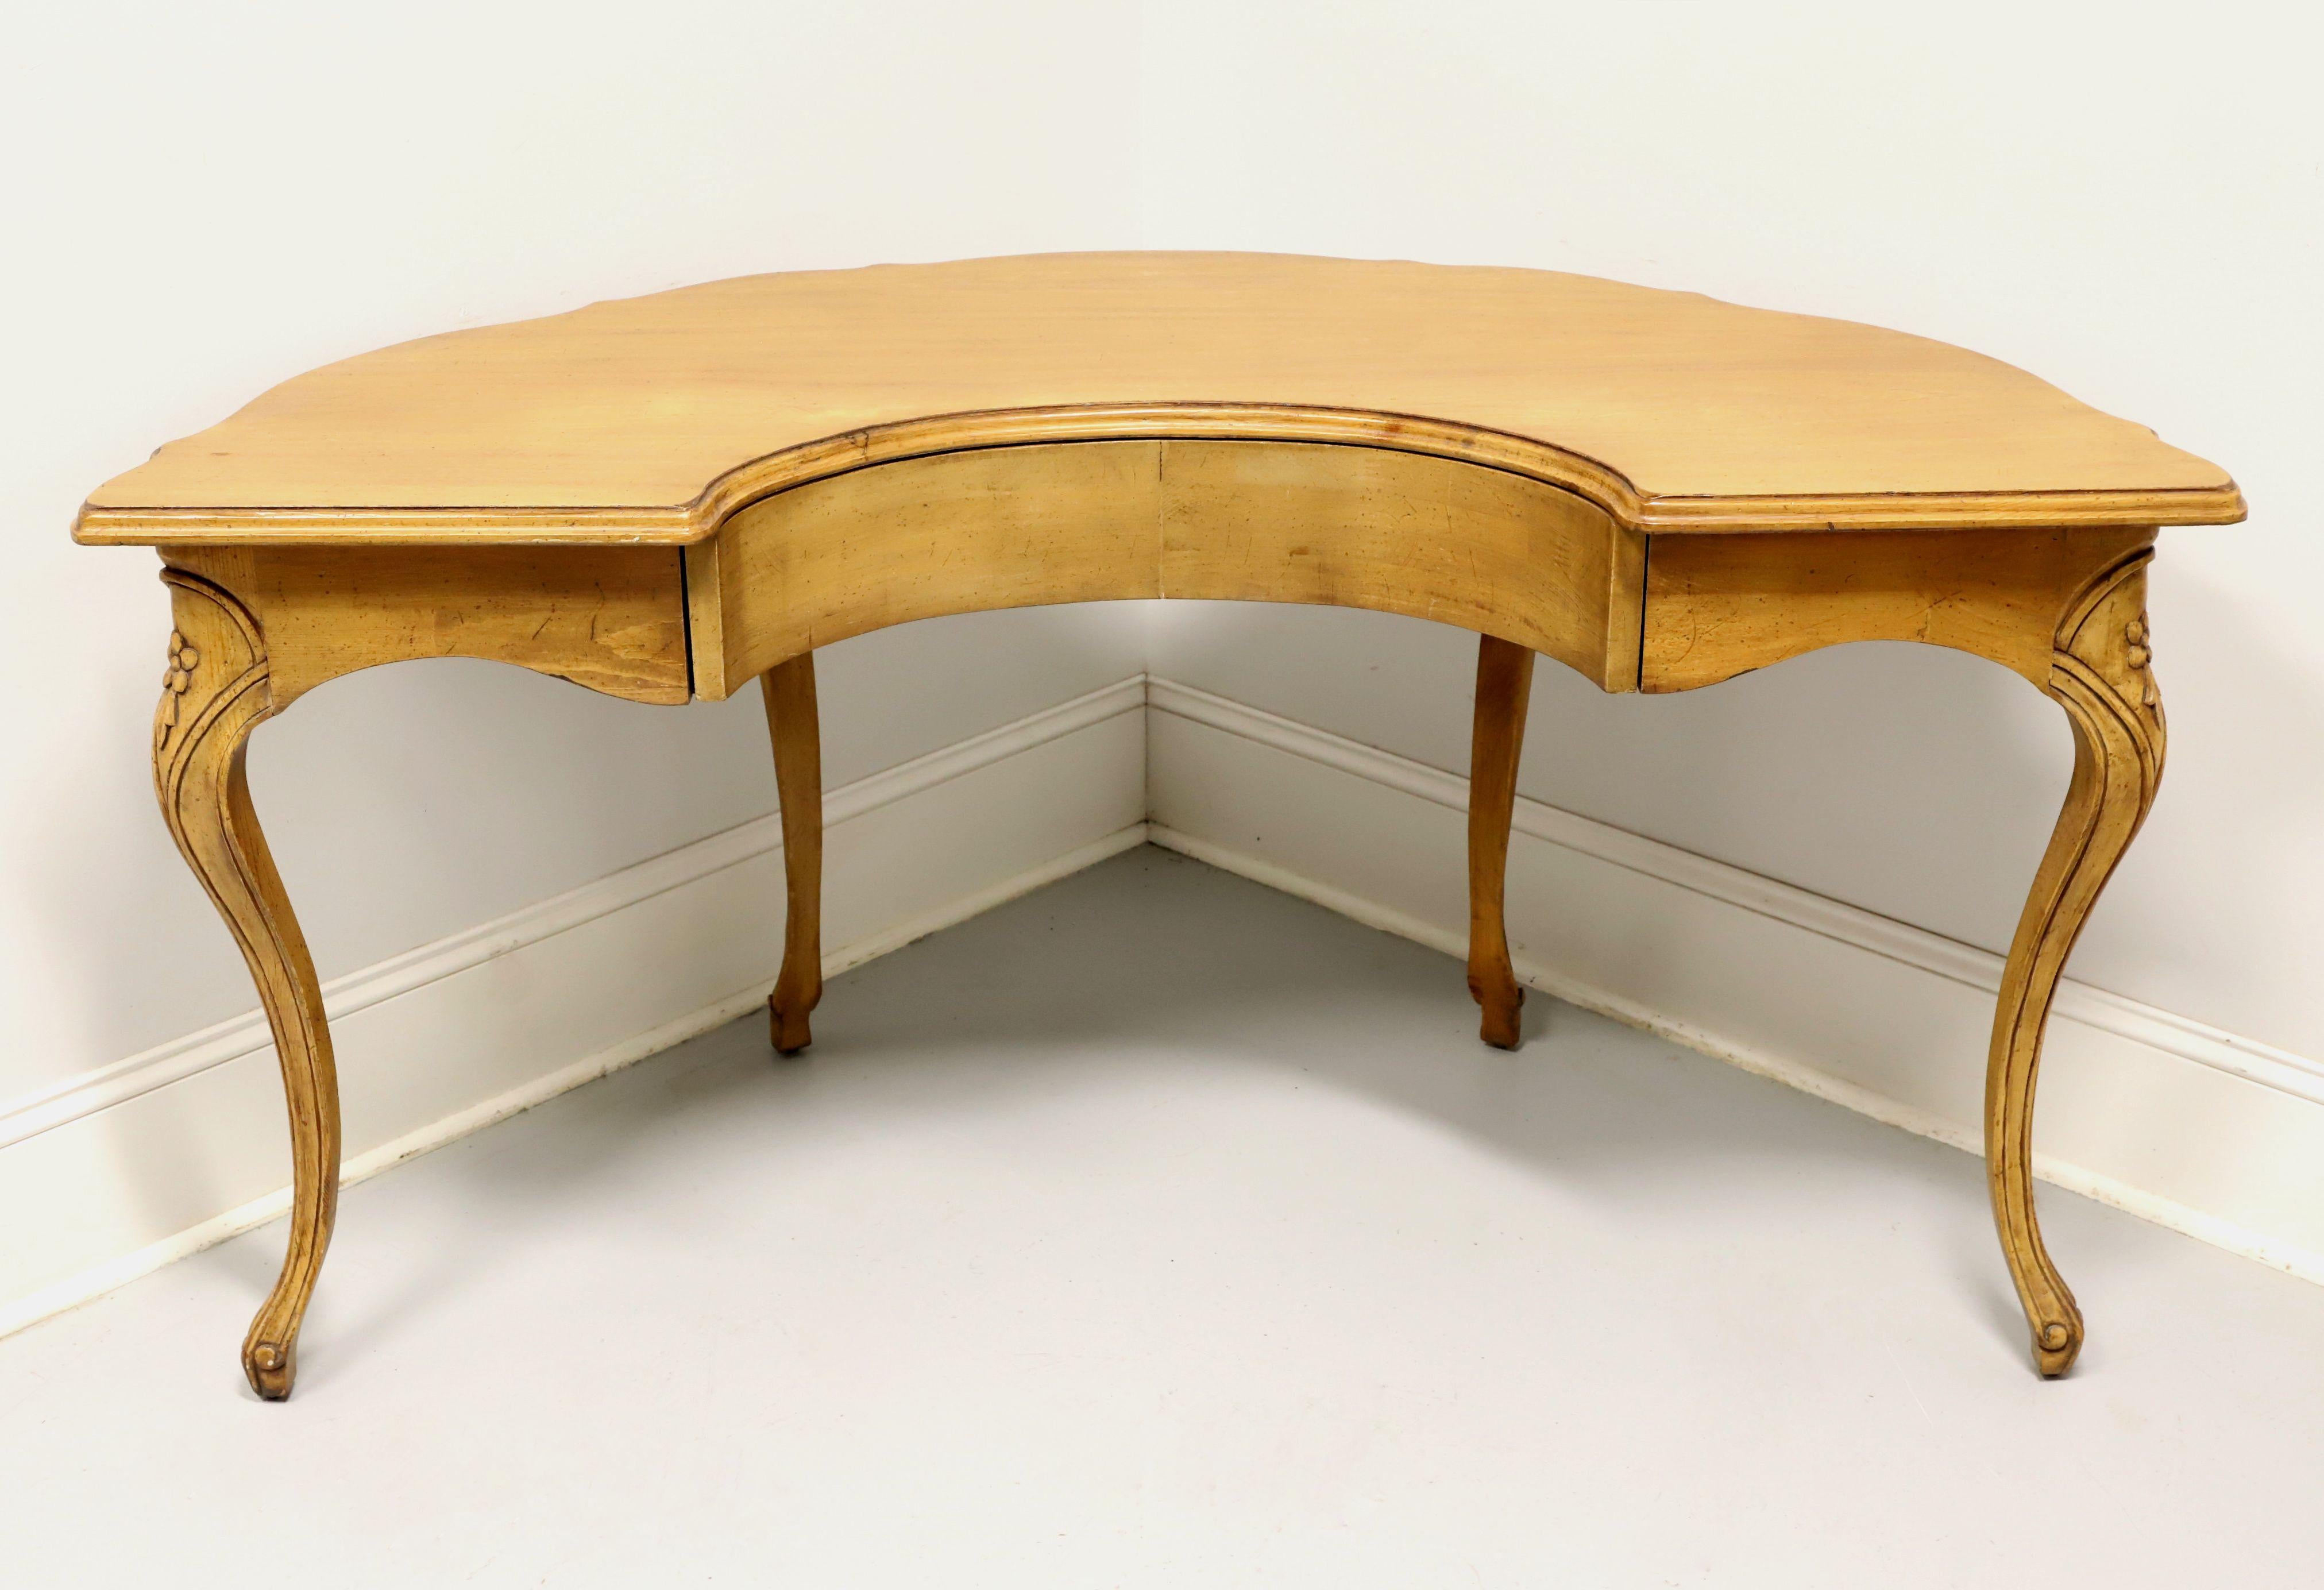 A French country style half circle writing desk by Wellesley Guild. Hand carved and crafted of walnut with a distressed finish, serpentine shaped smooth surface top with an ogee edge, decoratively carved outward facing apron, carved knees, curved